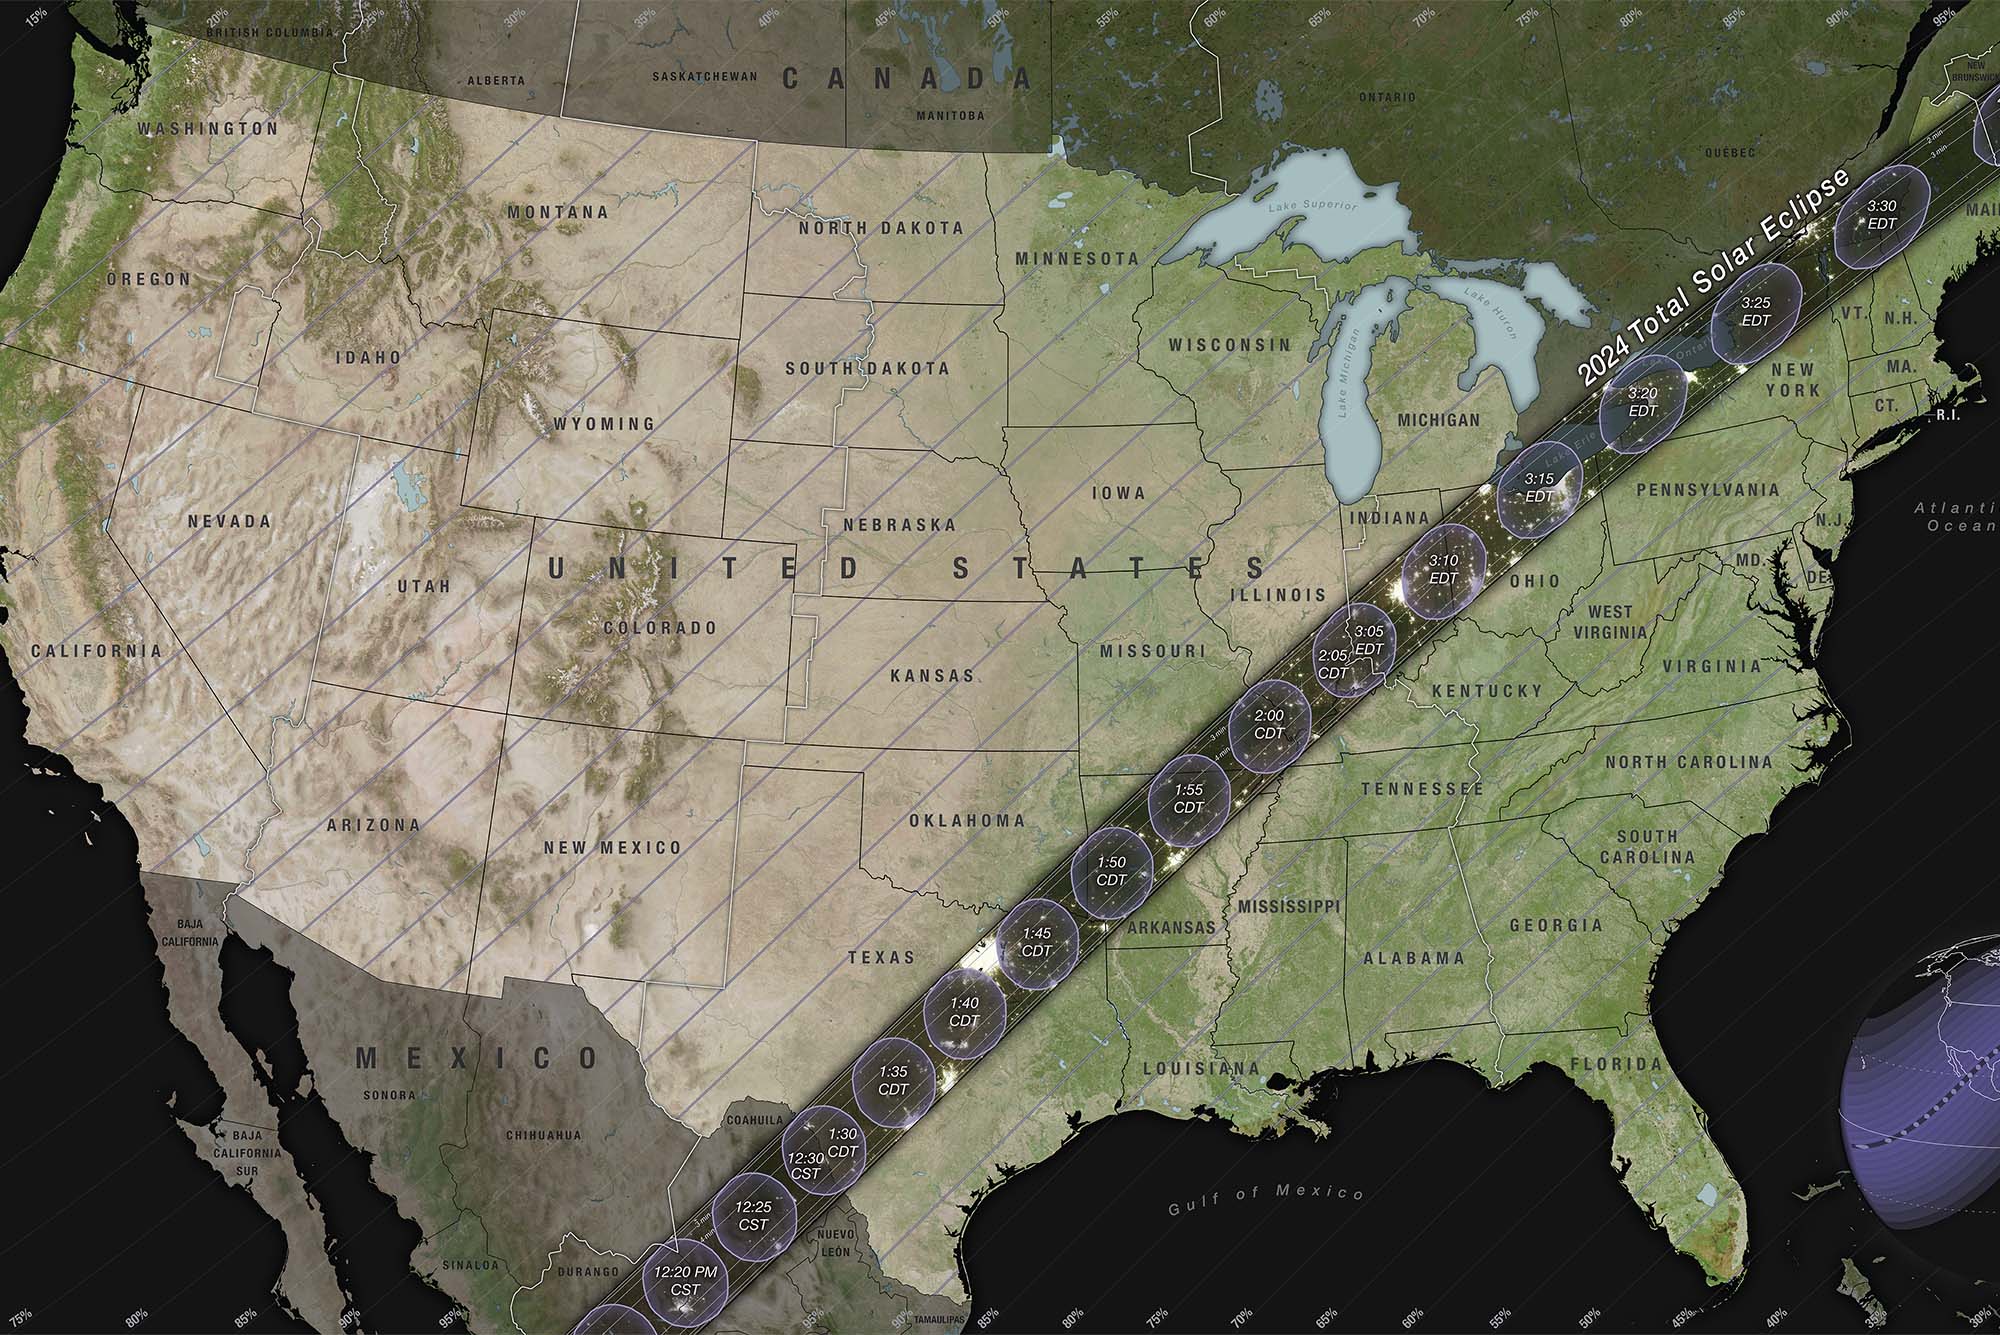 Illustration of the path of the 2024 total solar eclipse provided by NASA. Shows the United States in a mercator map projection with a thin black band running from Texas up to Northern Maine, where the eclipse can best be viewed